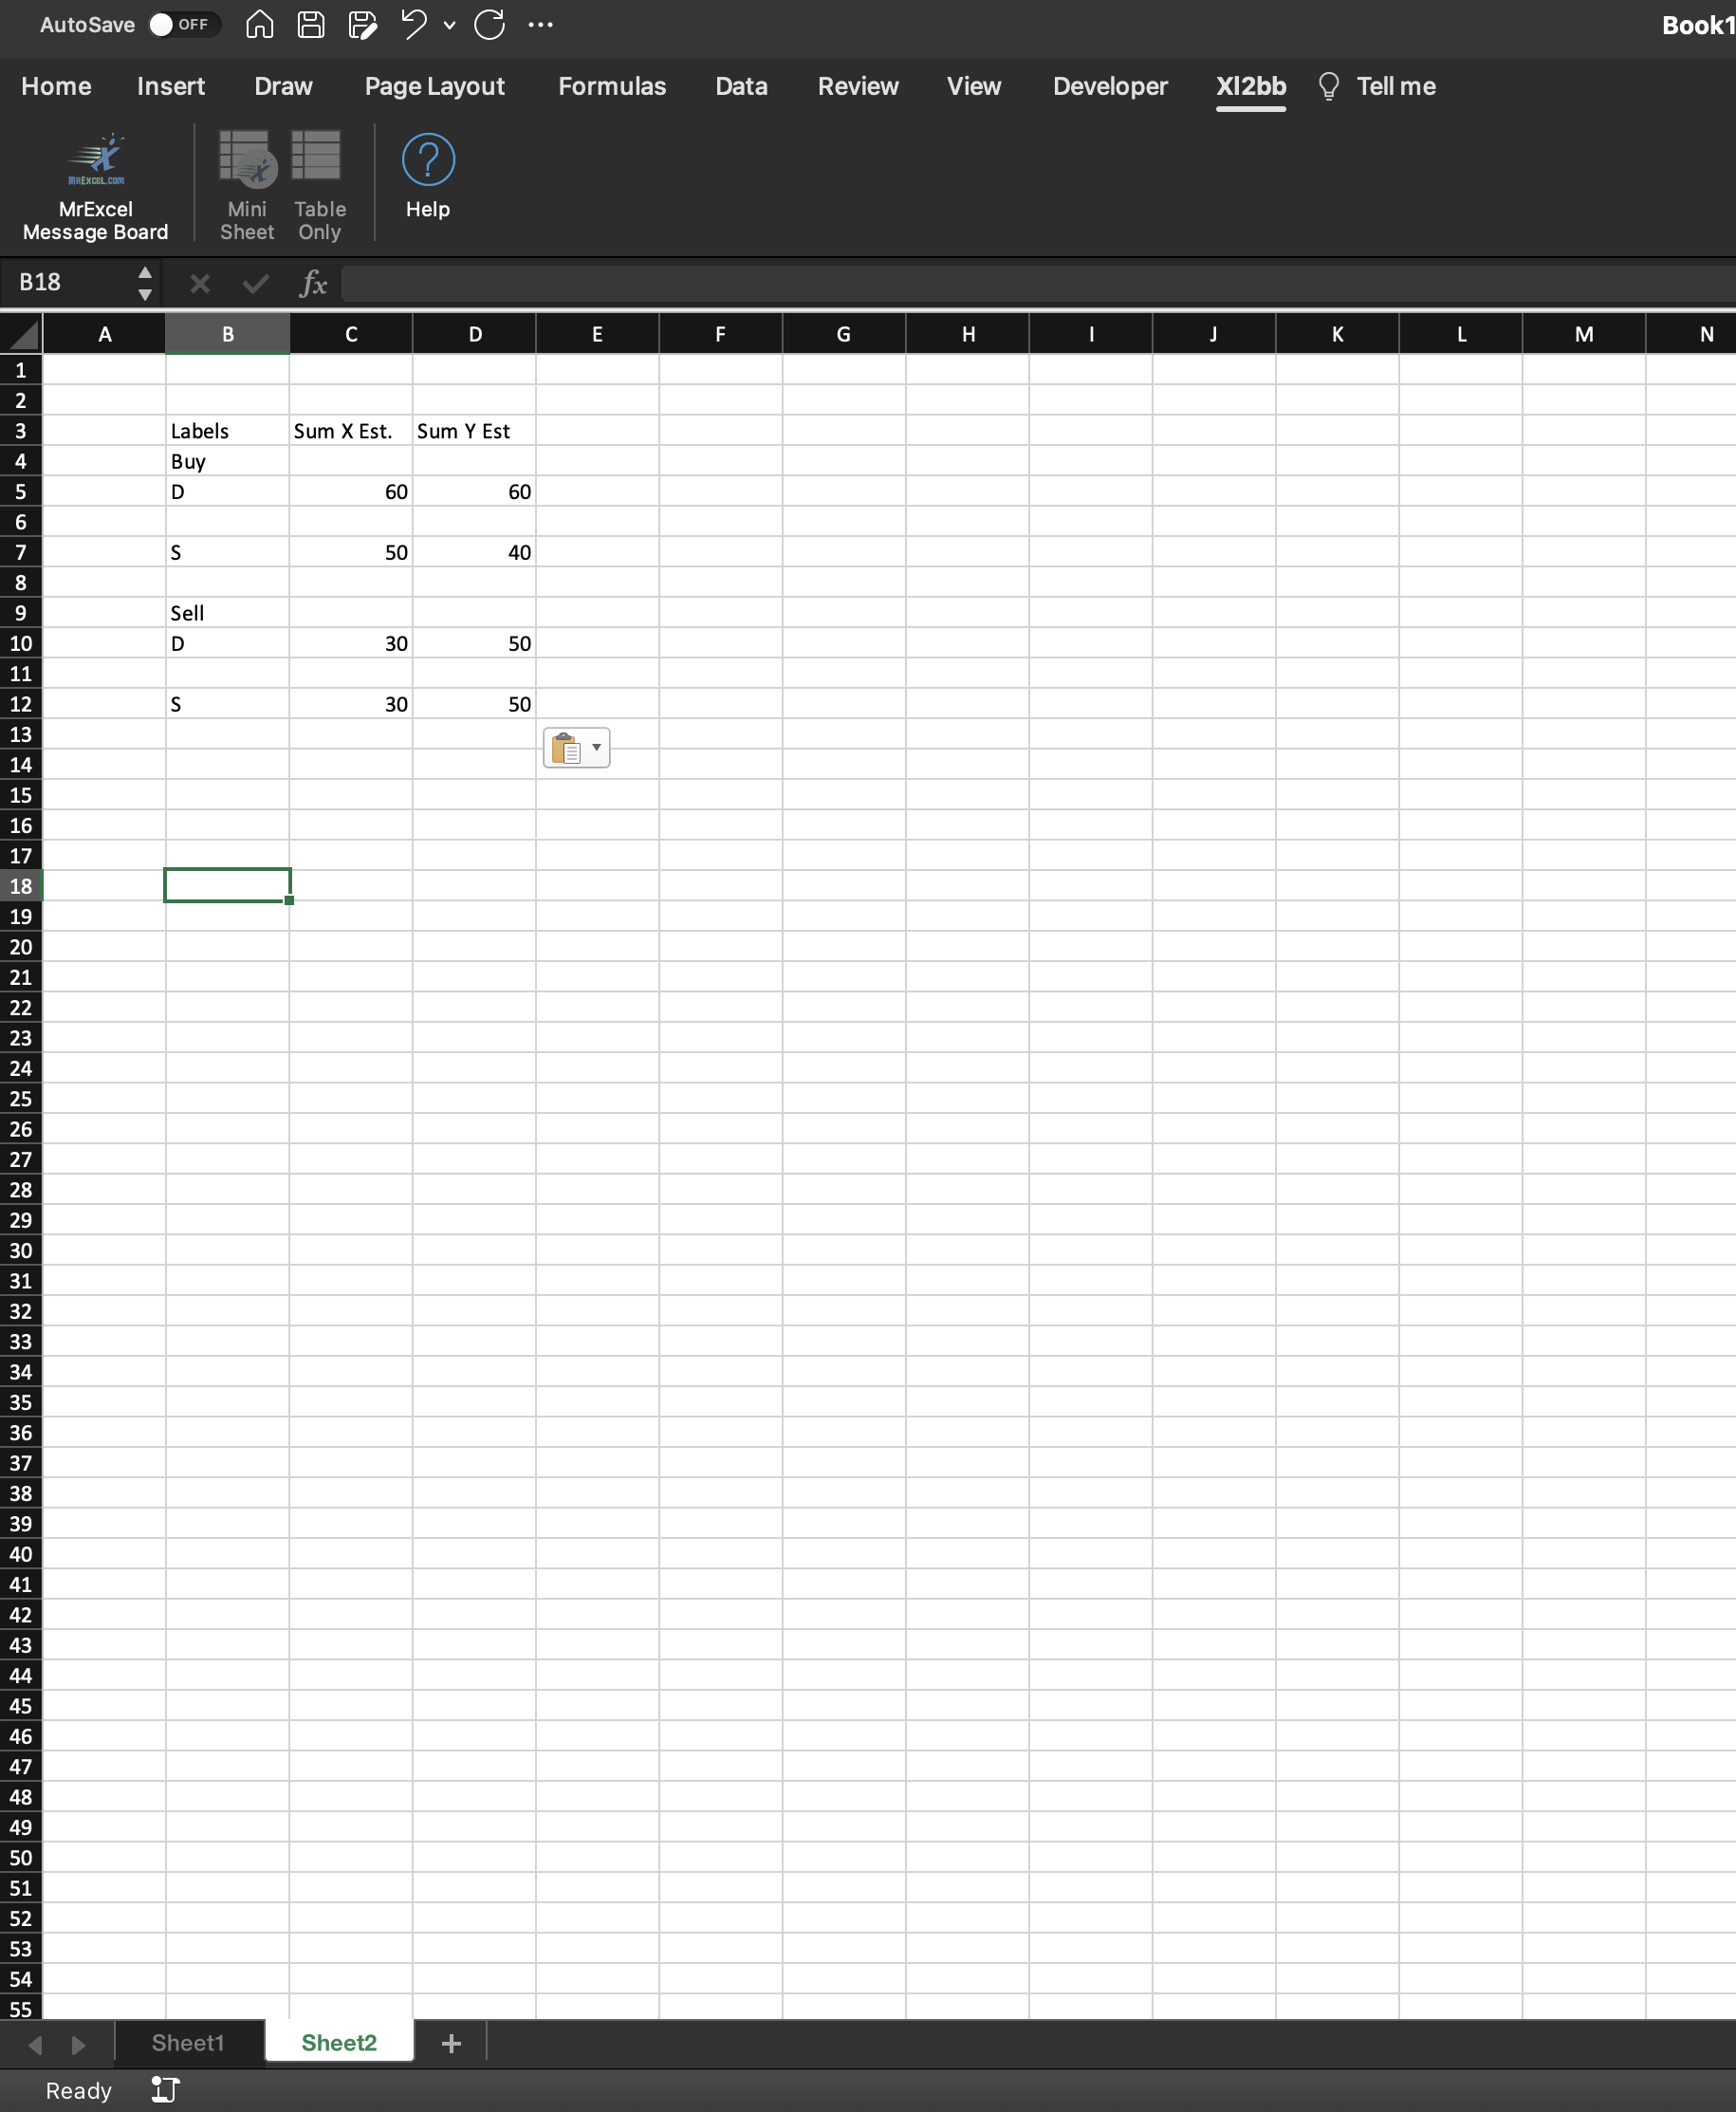 The image shows the PivotTable format I am working on